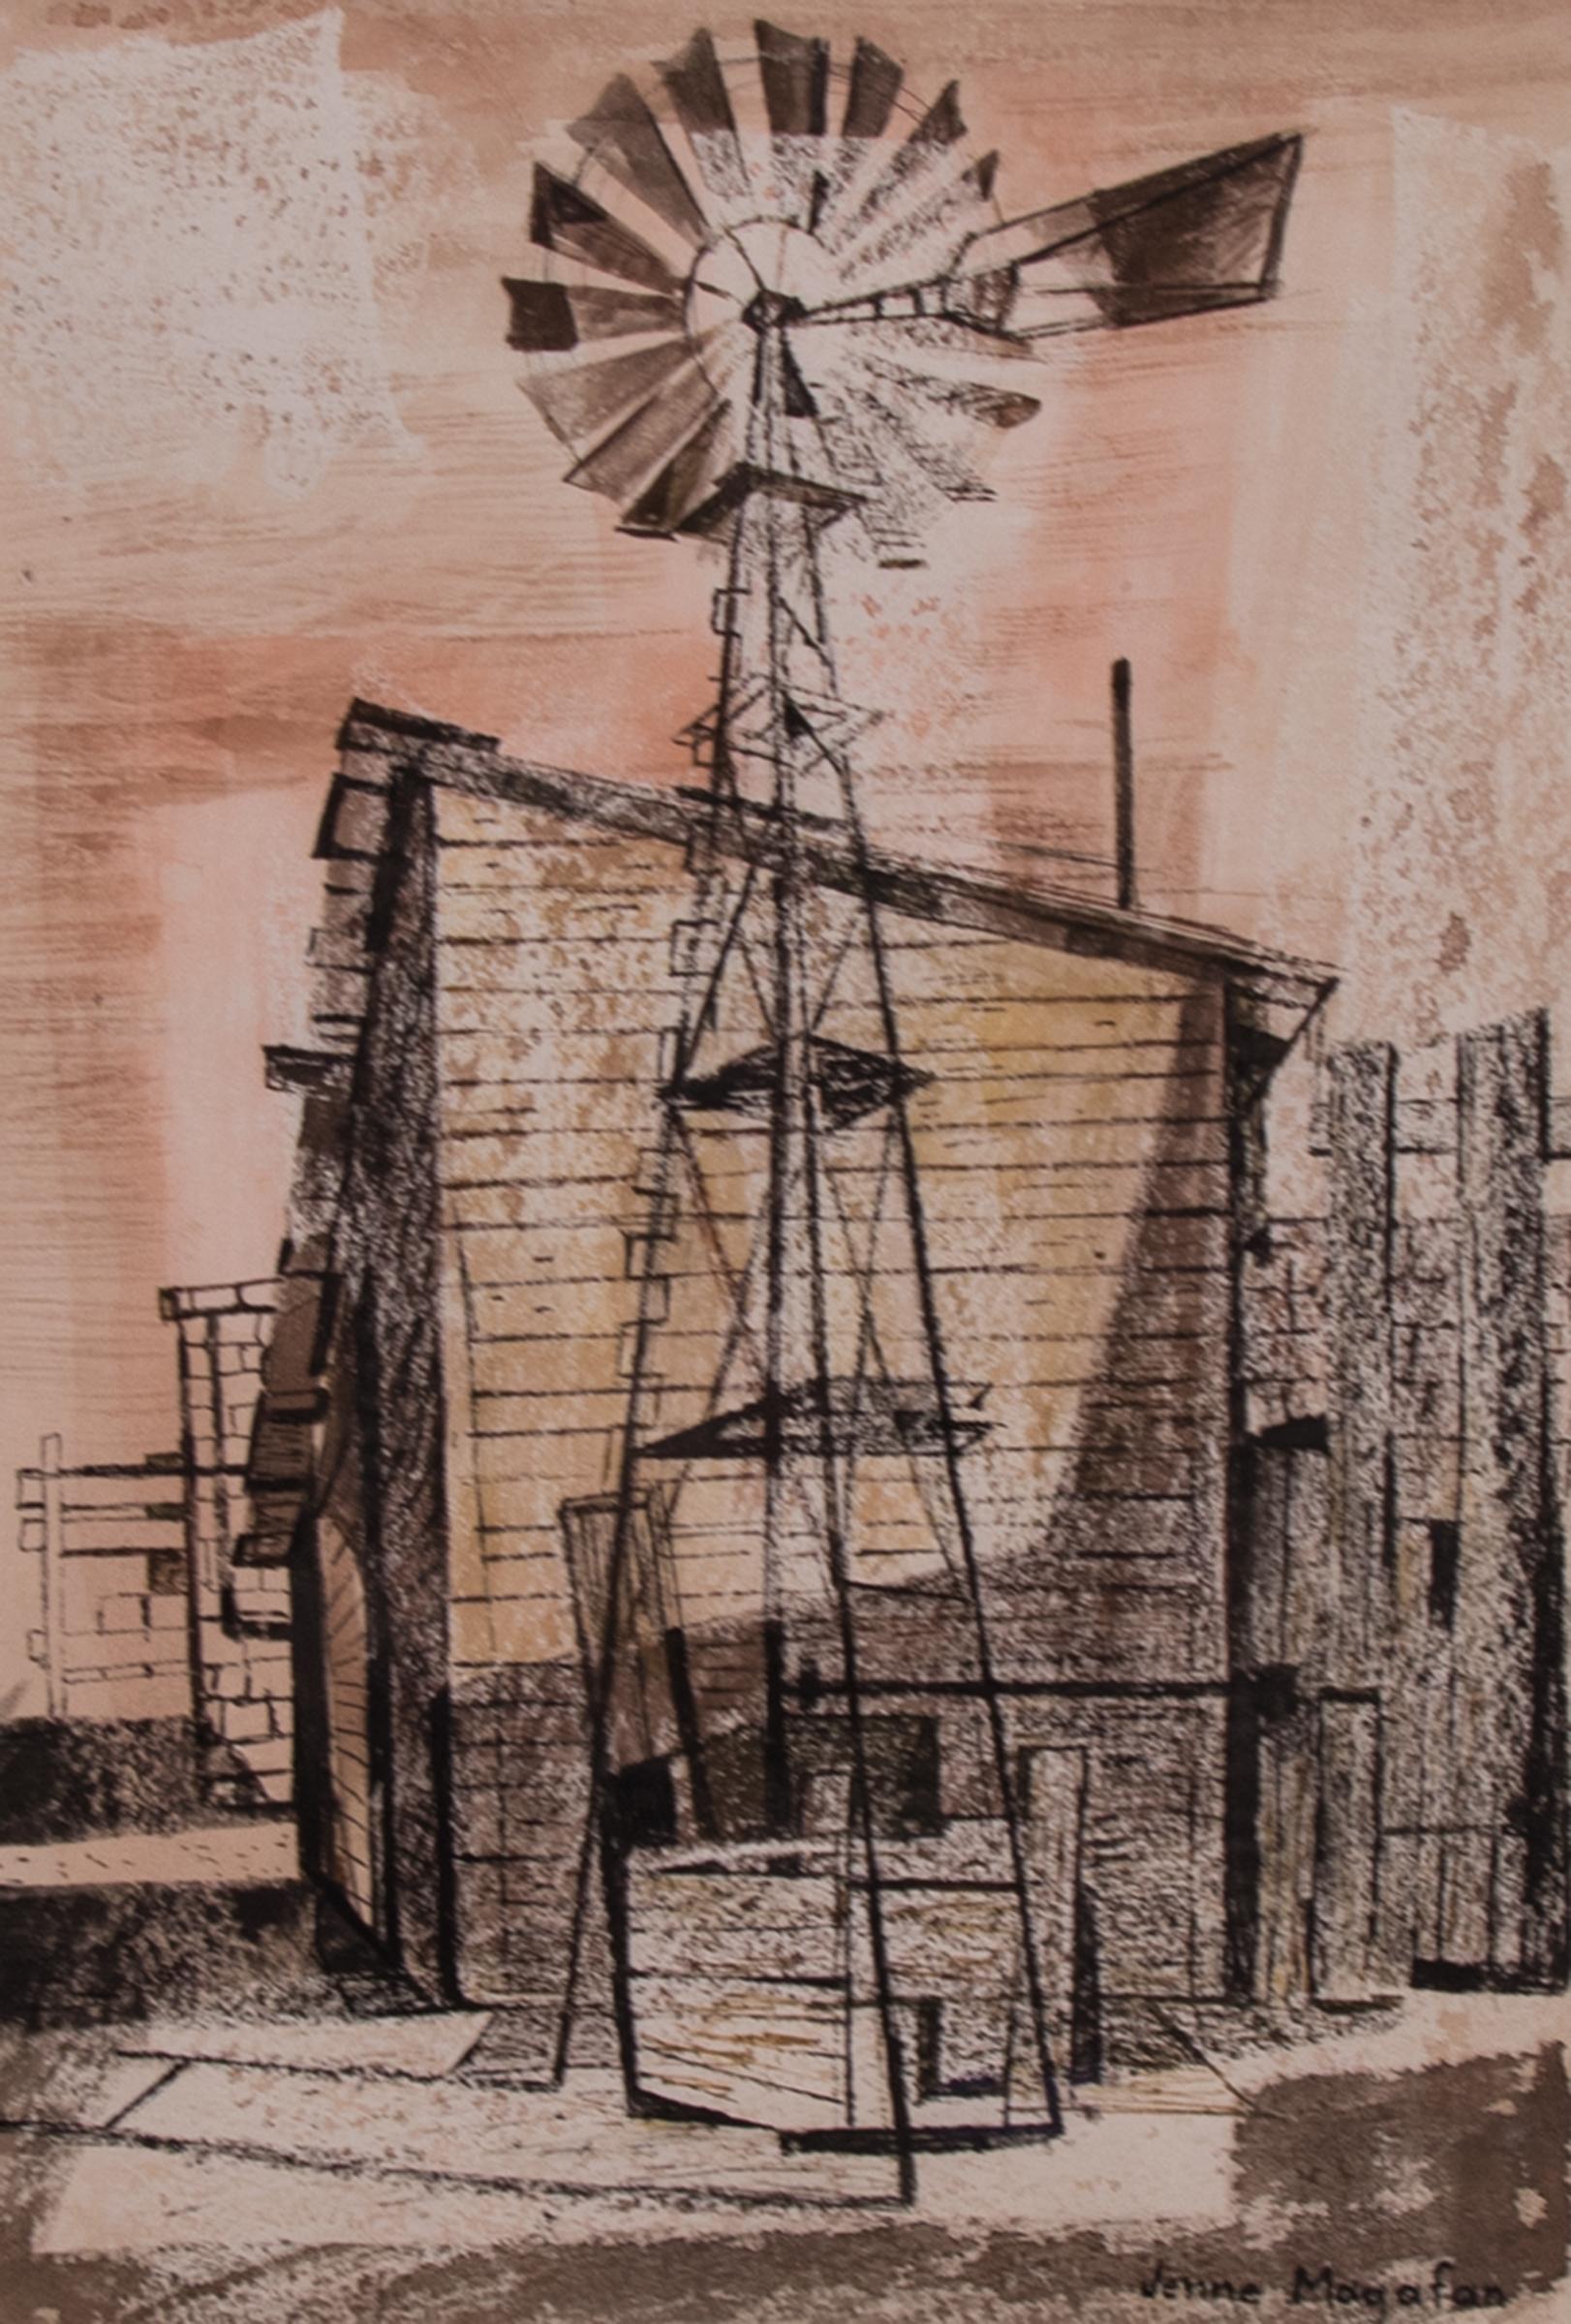 Windmill on the Plains, 1940s Watercolor and Ink Mixed Media Modernist Painting - Art by Jenne Magafan